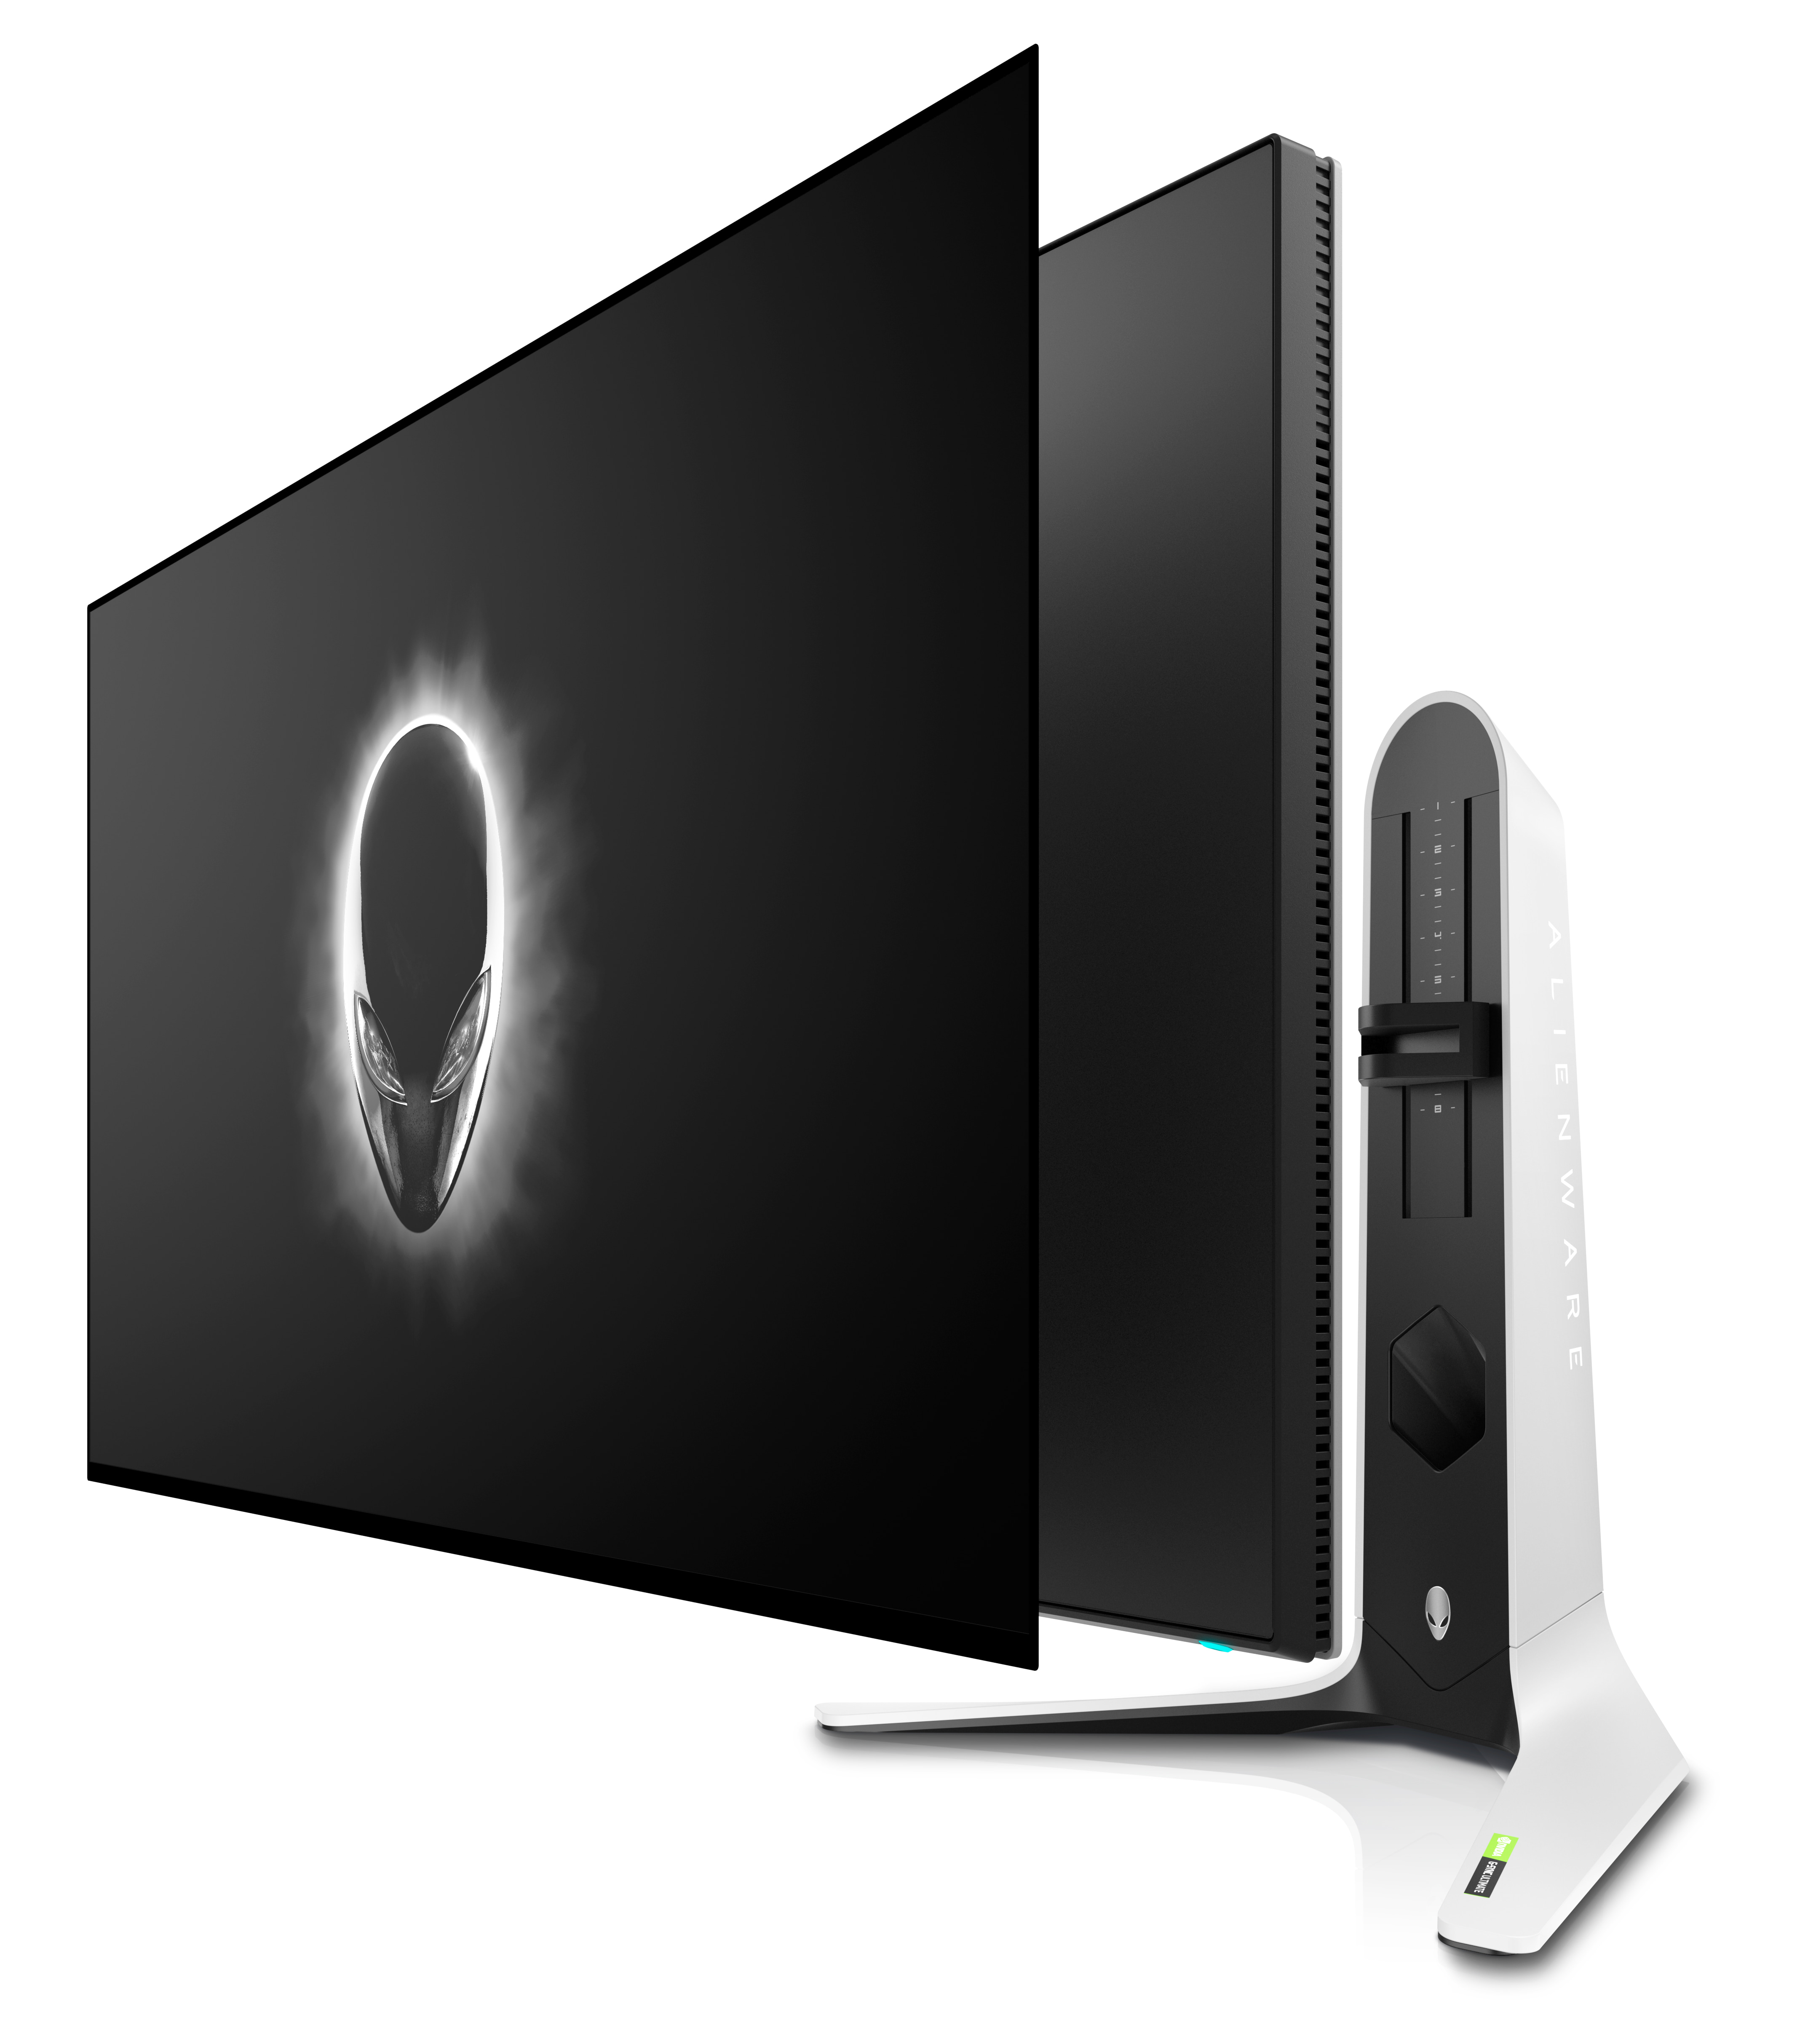 Alienware 27-Inch QHD Gaming Monitor: AW2721D | Dell USA